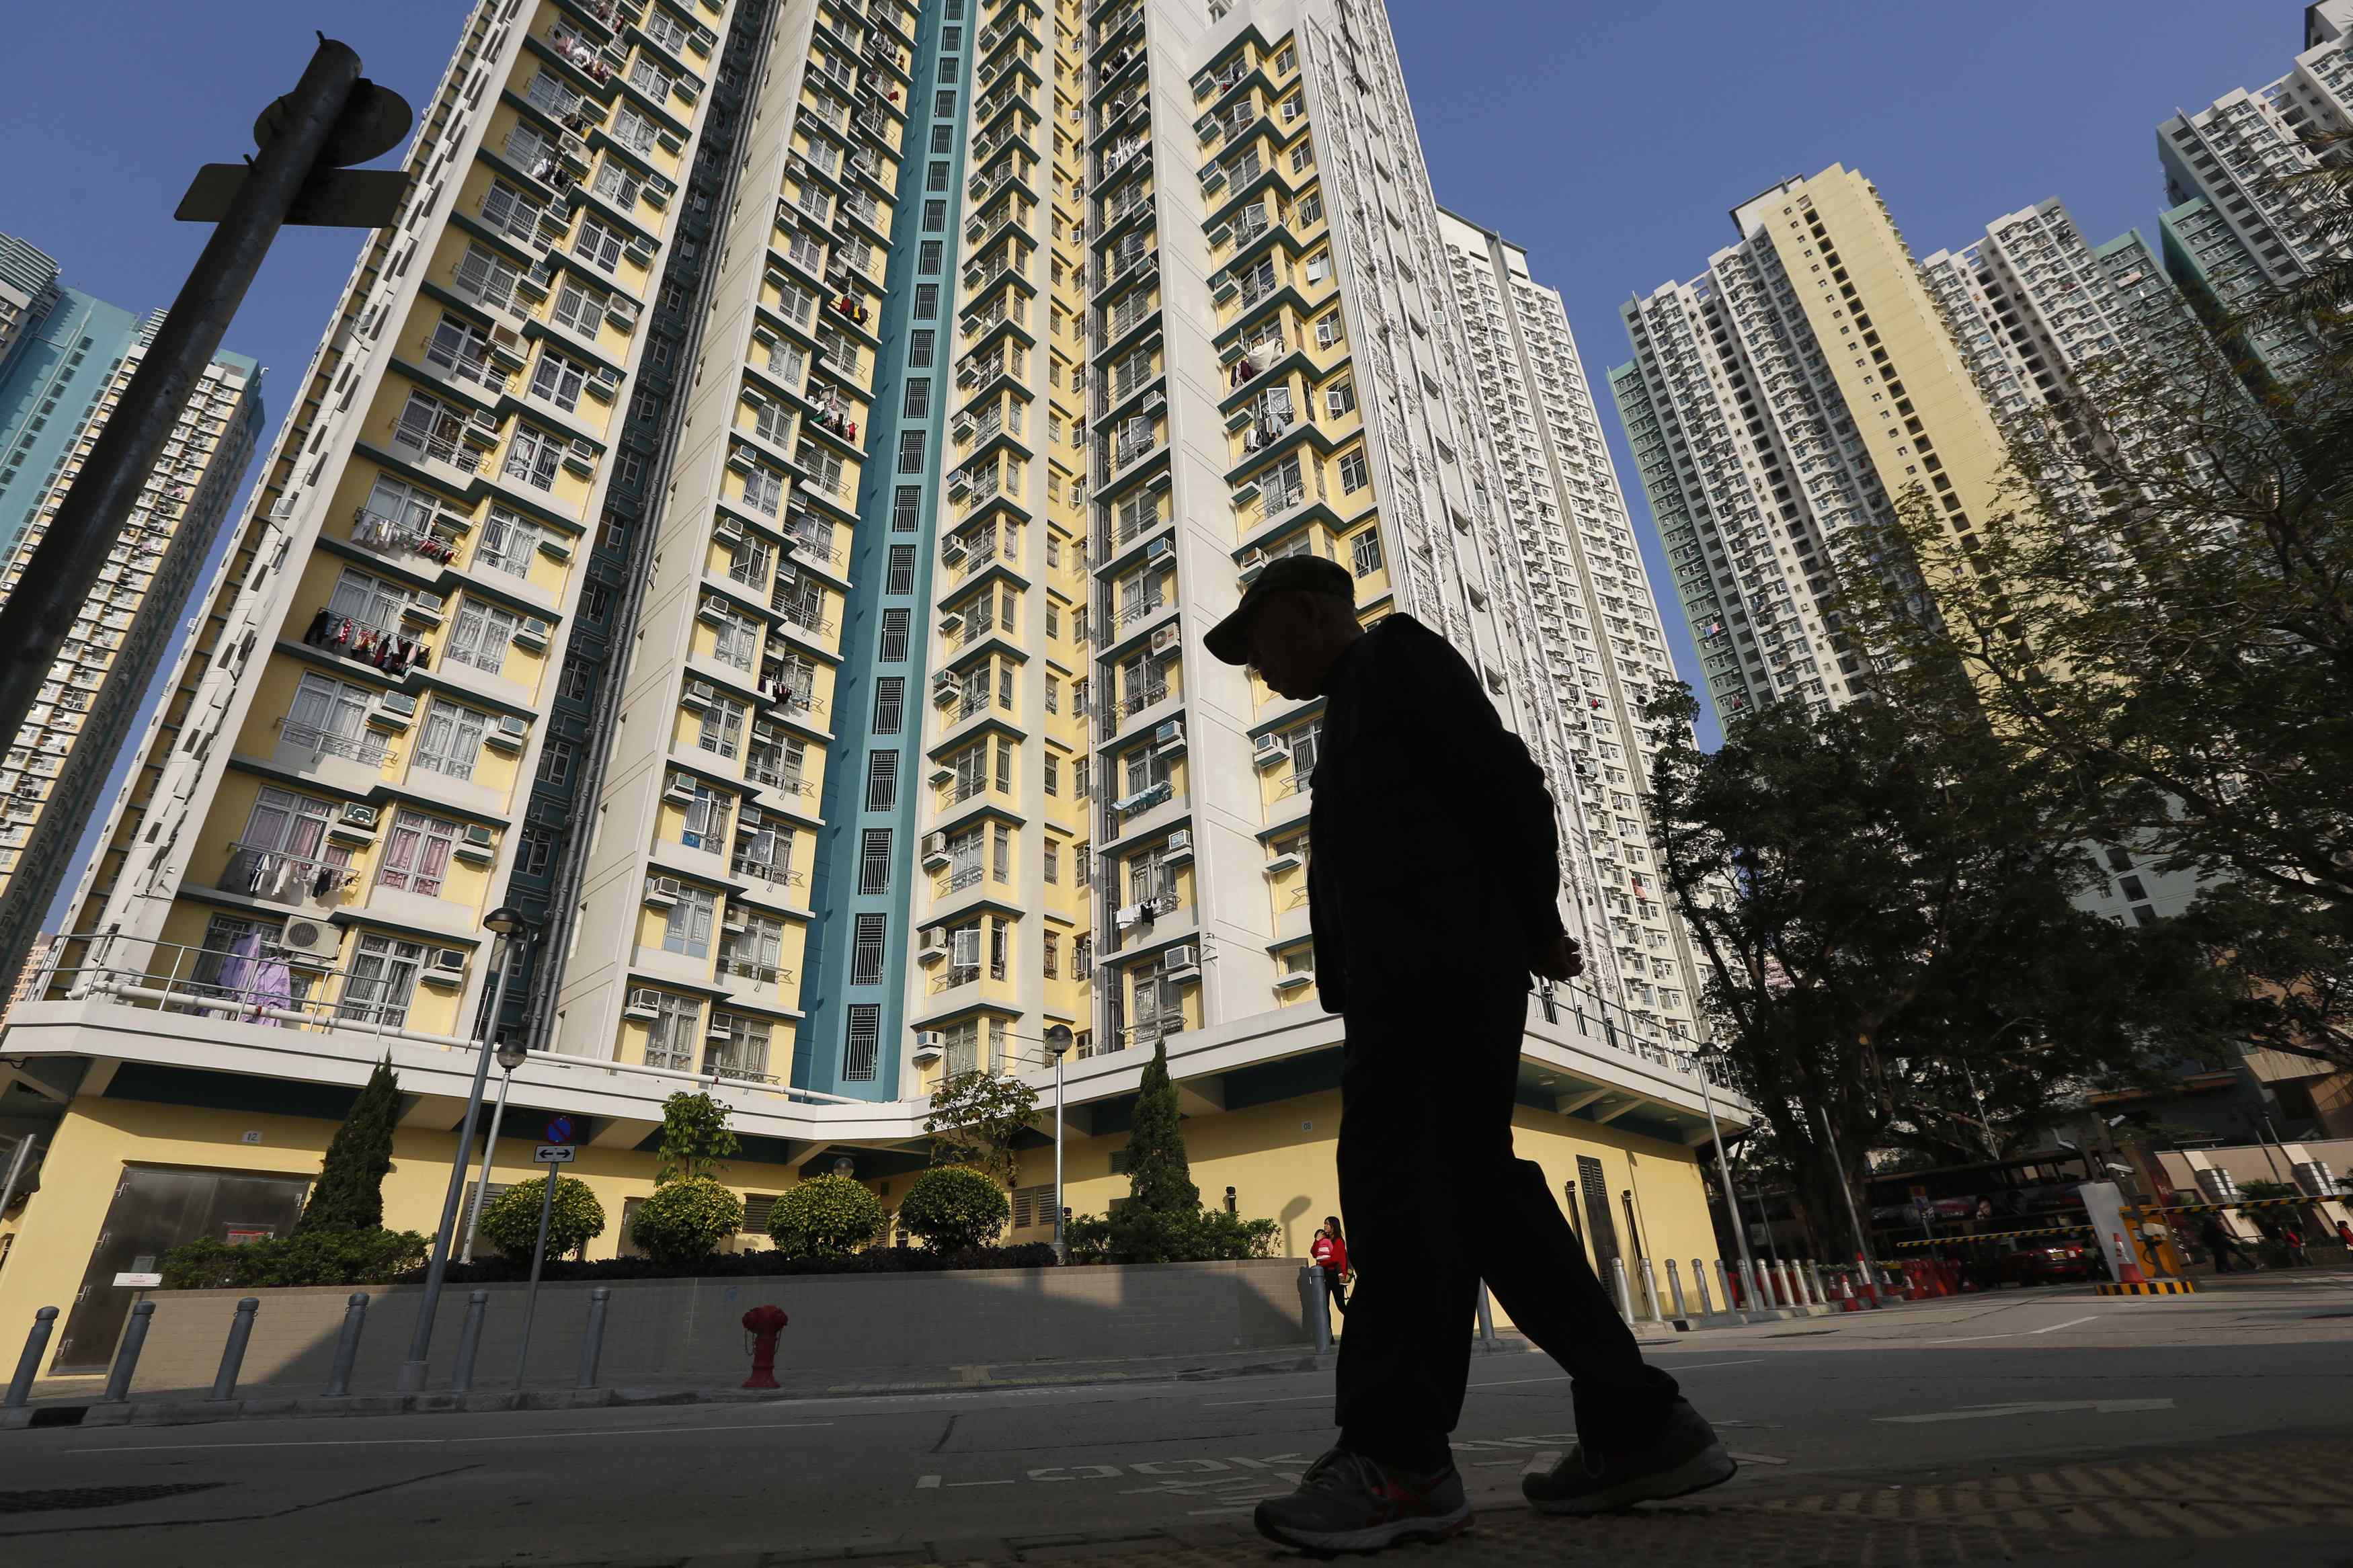 A man walks past public housing in Hong Kong January 16, 2013. Embattled Hong Kong leader Leung Chun-ying made his maiden policy speech on Wednesday unveiling policies aimed at reviving his battered reputation, such as increasing land supply to cool a hot property market, fighting pollution and boosting welfare. REUTERS/Tyrone Siu (CHINA - Tags: POLITICS BUSINESS REAL ESTATE SOCIETY)